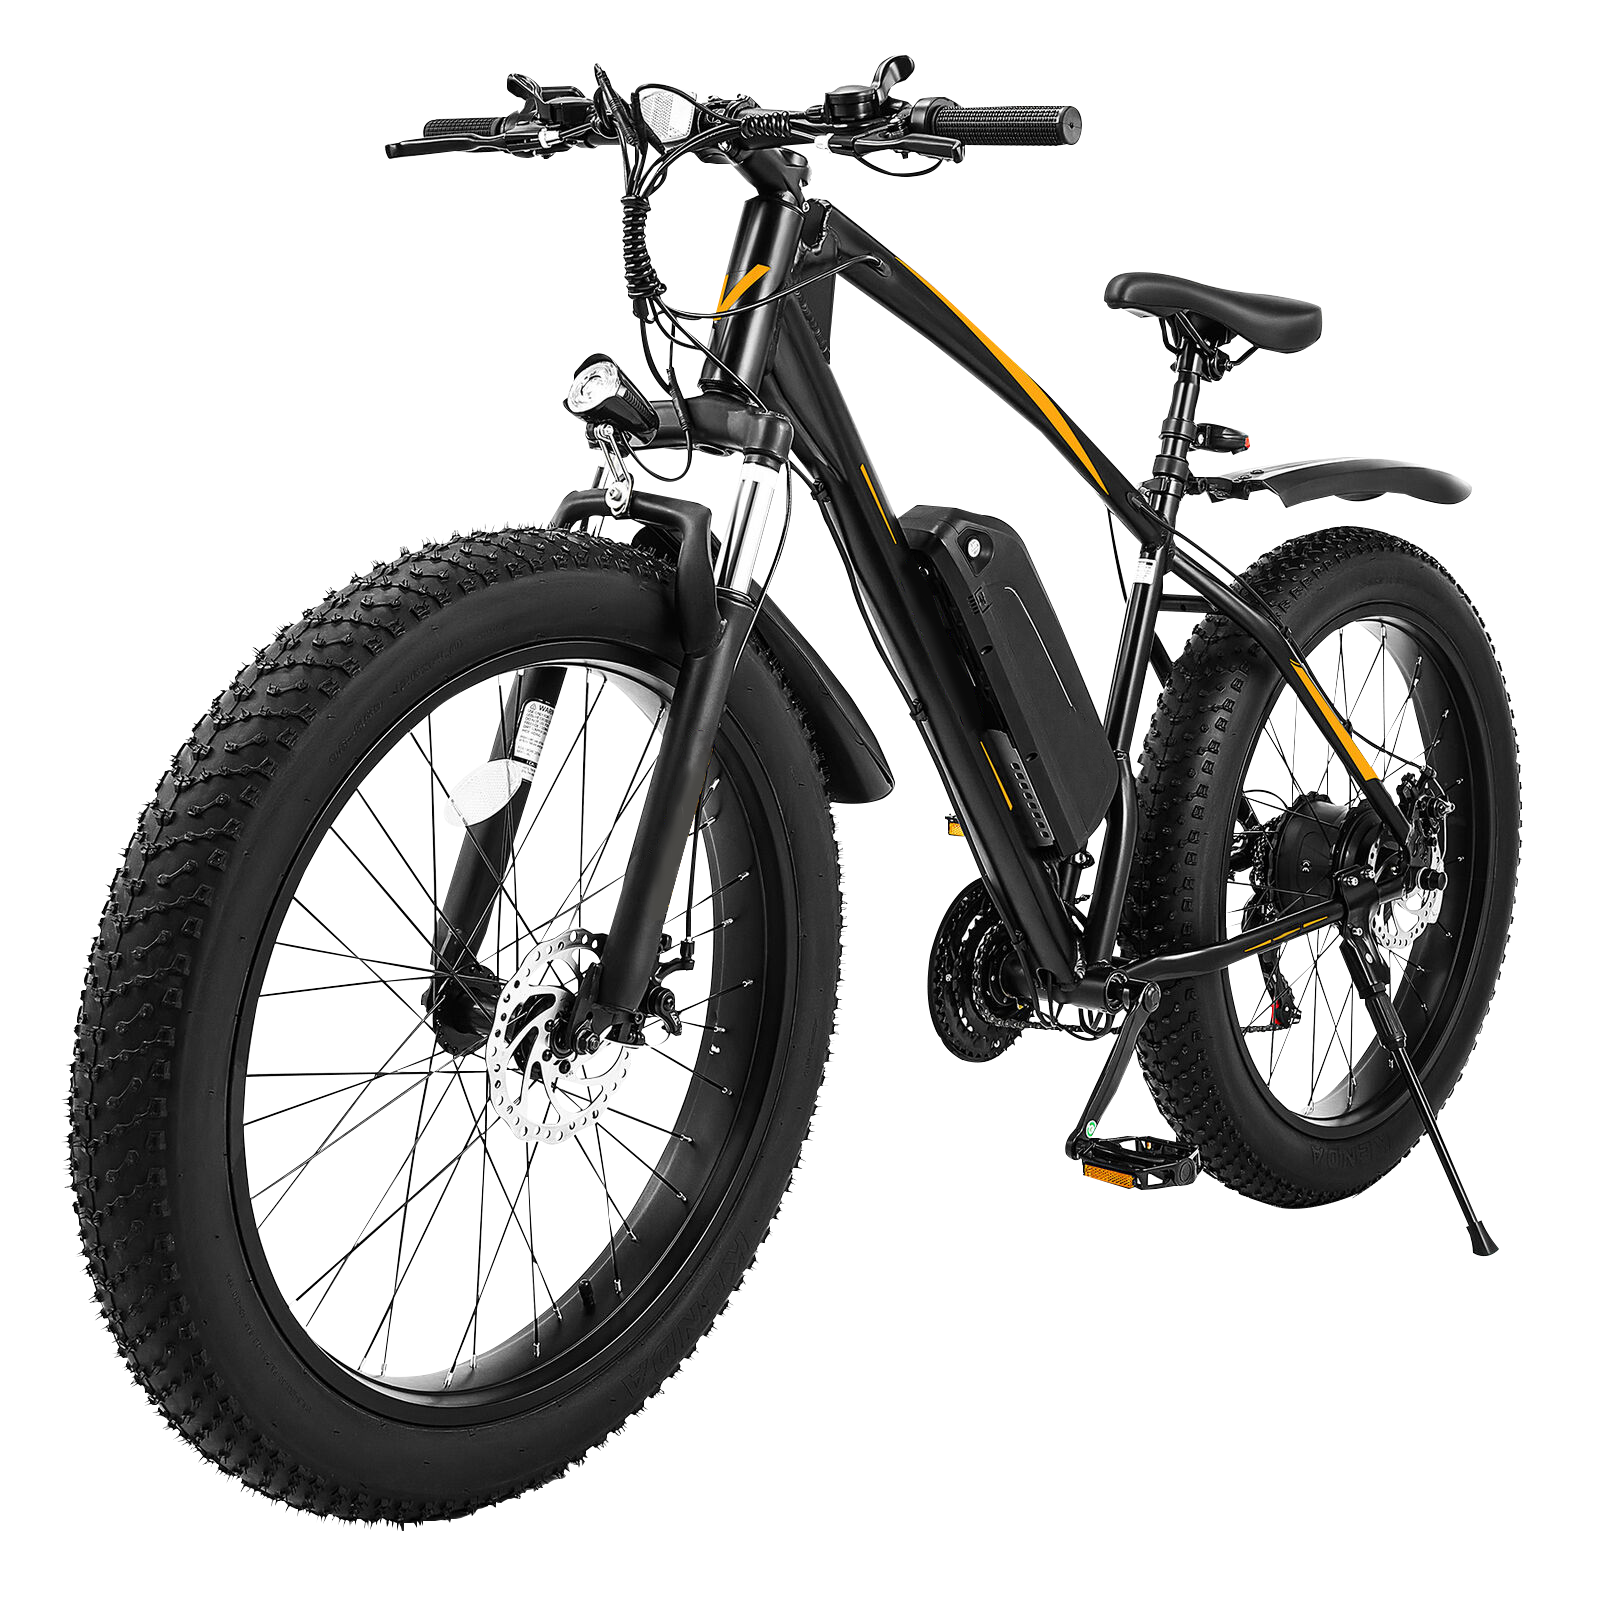 GetfitproEv - RIDE THE ELECTRIC REVOLUTION X1 Electric Cycle (18" Frame, 7.65 - 15 Ah Li-Ion Removable Battery, Front Suspension, 250W Bldc Motor)